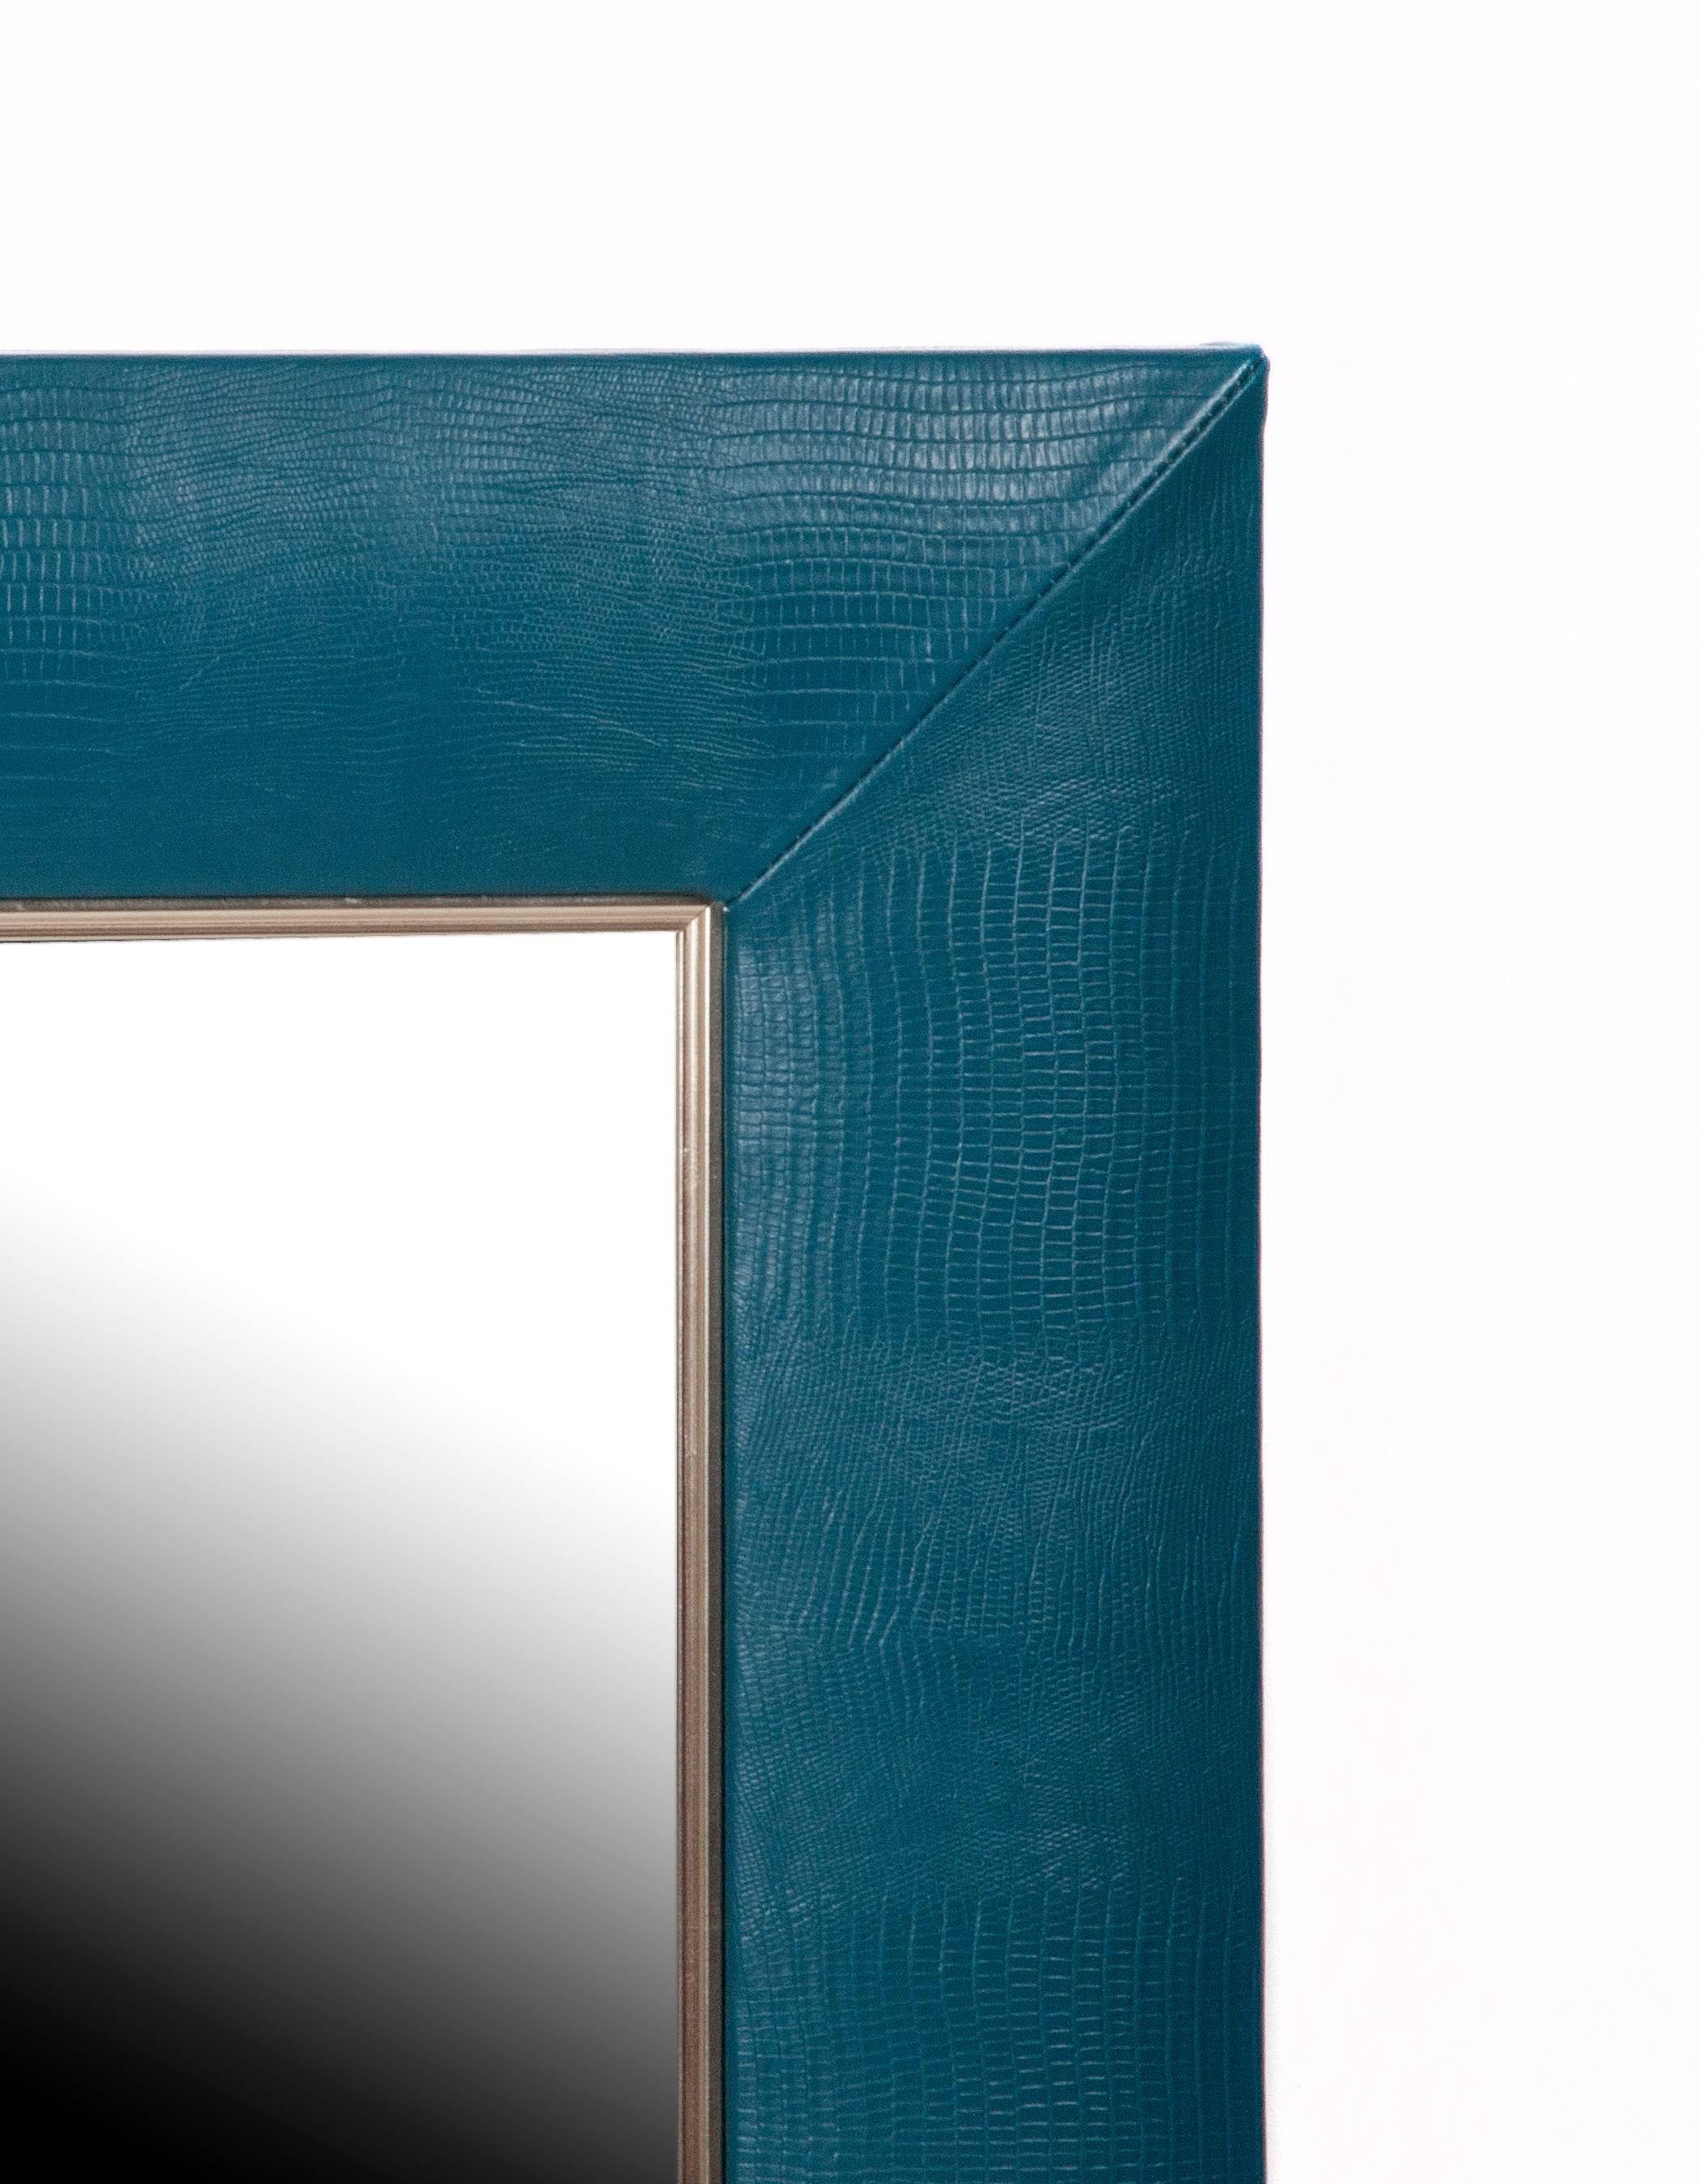 Lizard embossed Italian leather

1 ¼” beveled mirror
4” wide leather frame
Hand-stitched corners
Measurements including frame: 30” W x 36” H x 1” D

For custom sizes request a quote or call our office to speak to a